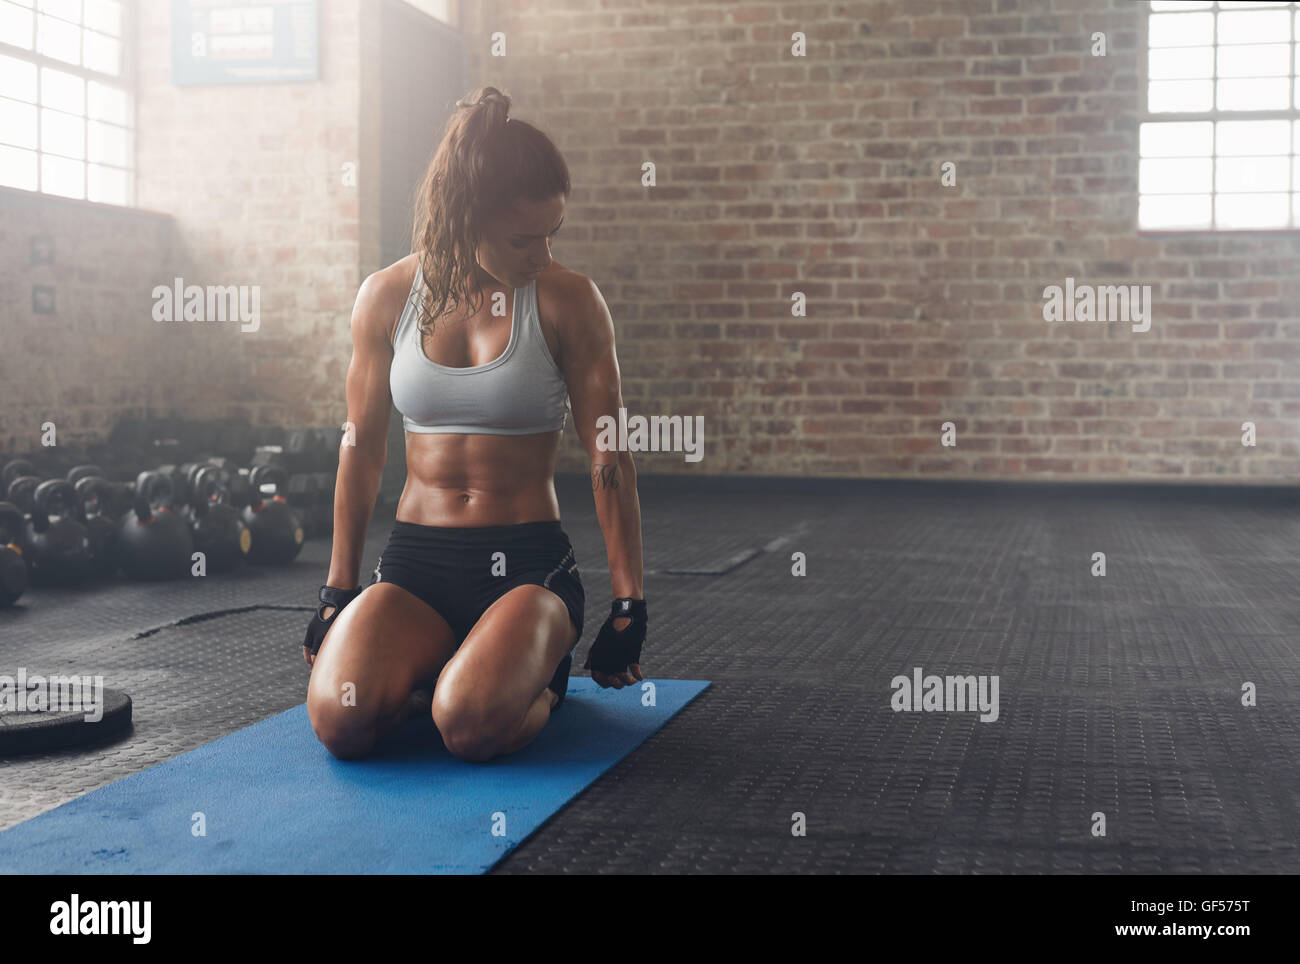 Shot of fitness woman sitting on exercise mat and looking at her triceps. Muscular woman working out at the fitness club. Stock Photo